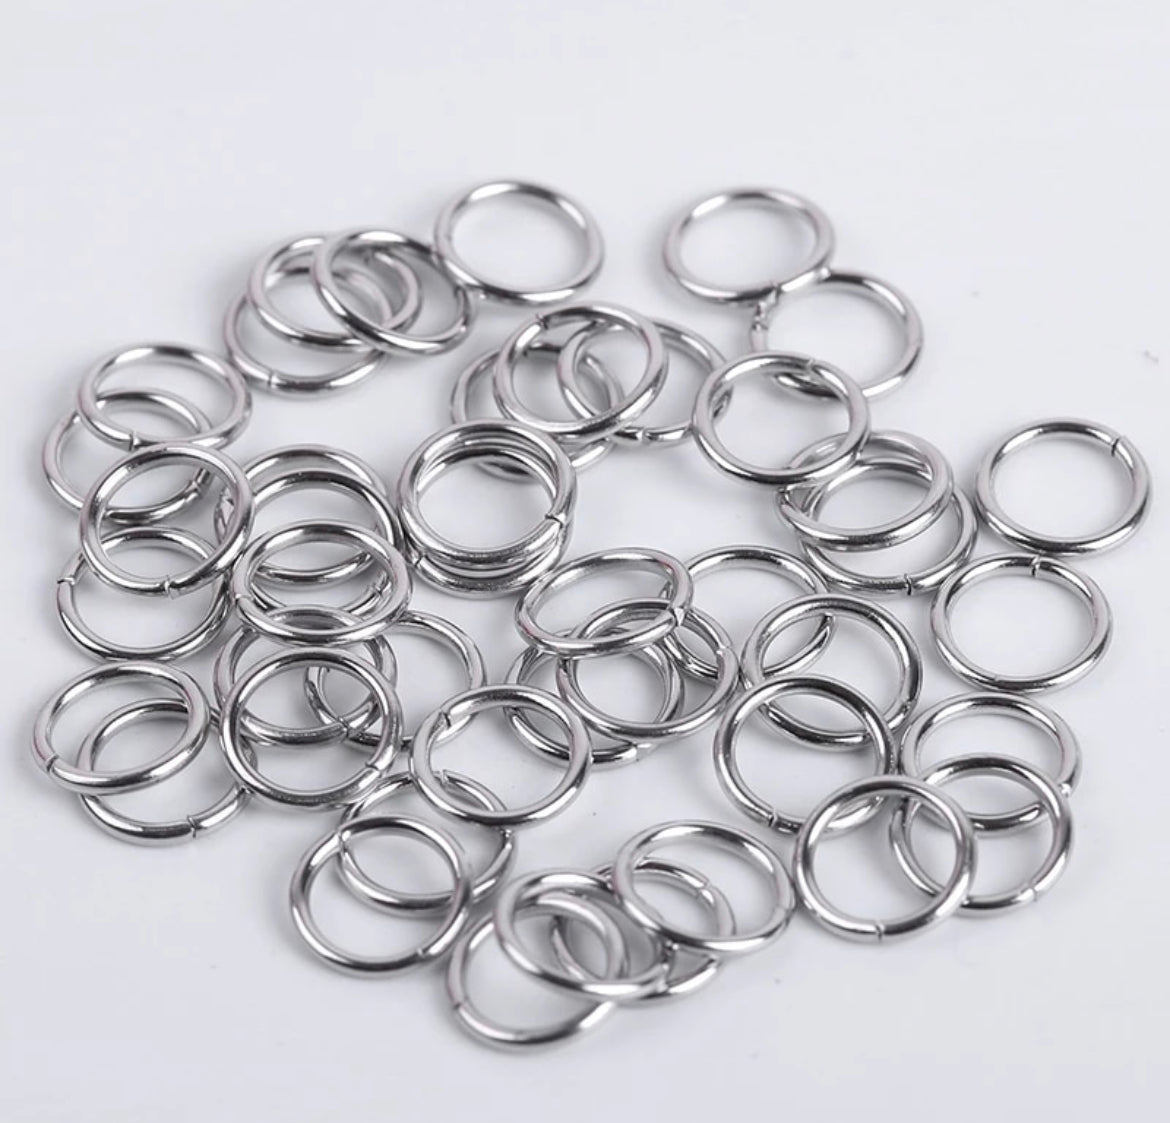 Stainless steel Jump rings - 10mm - 100 pieces